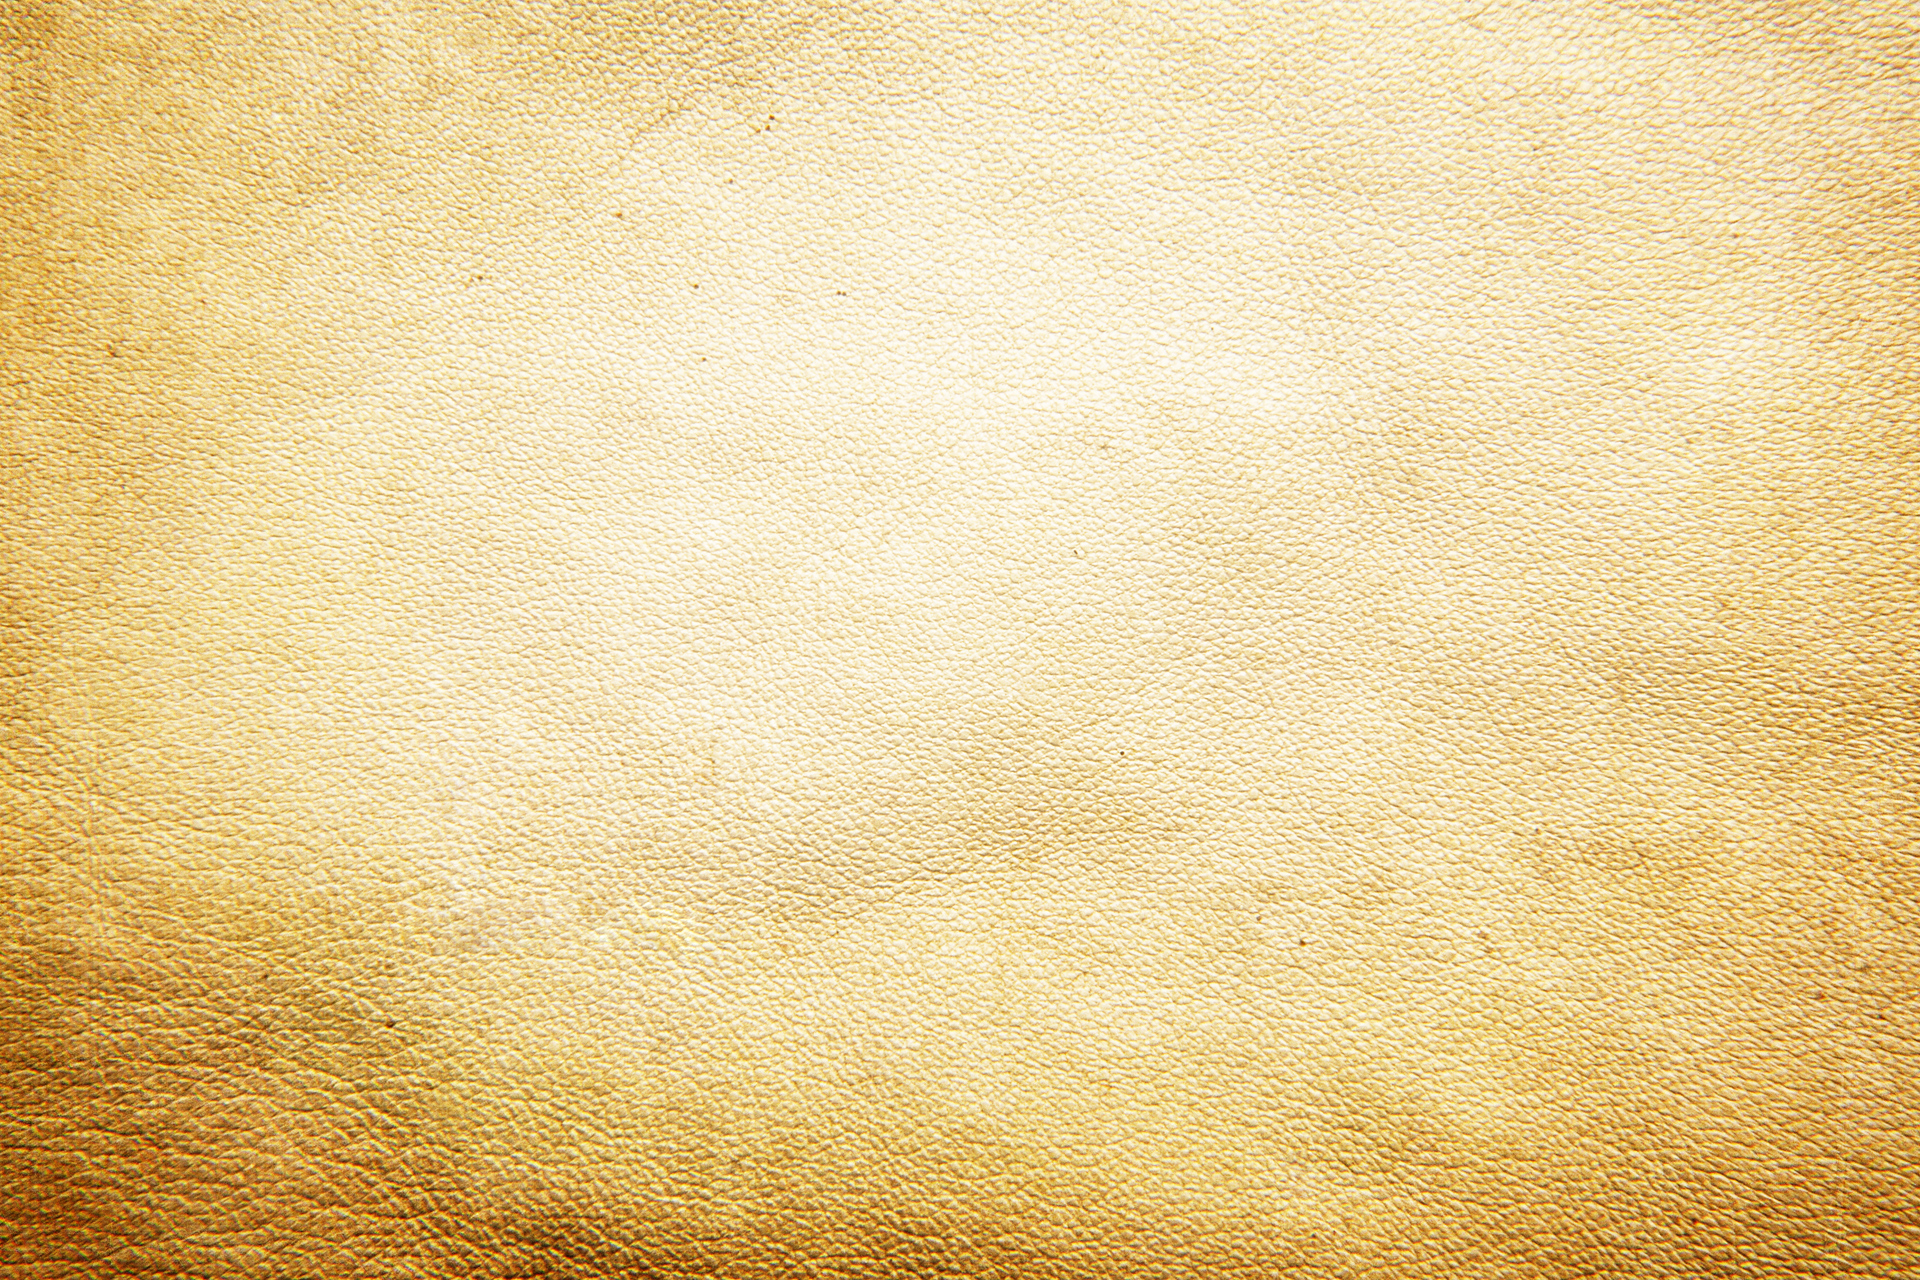 In Grunge Leather Background Texture HD Jpg Previous Next